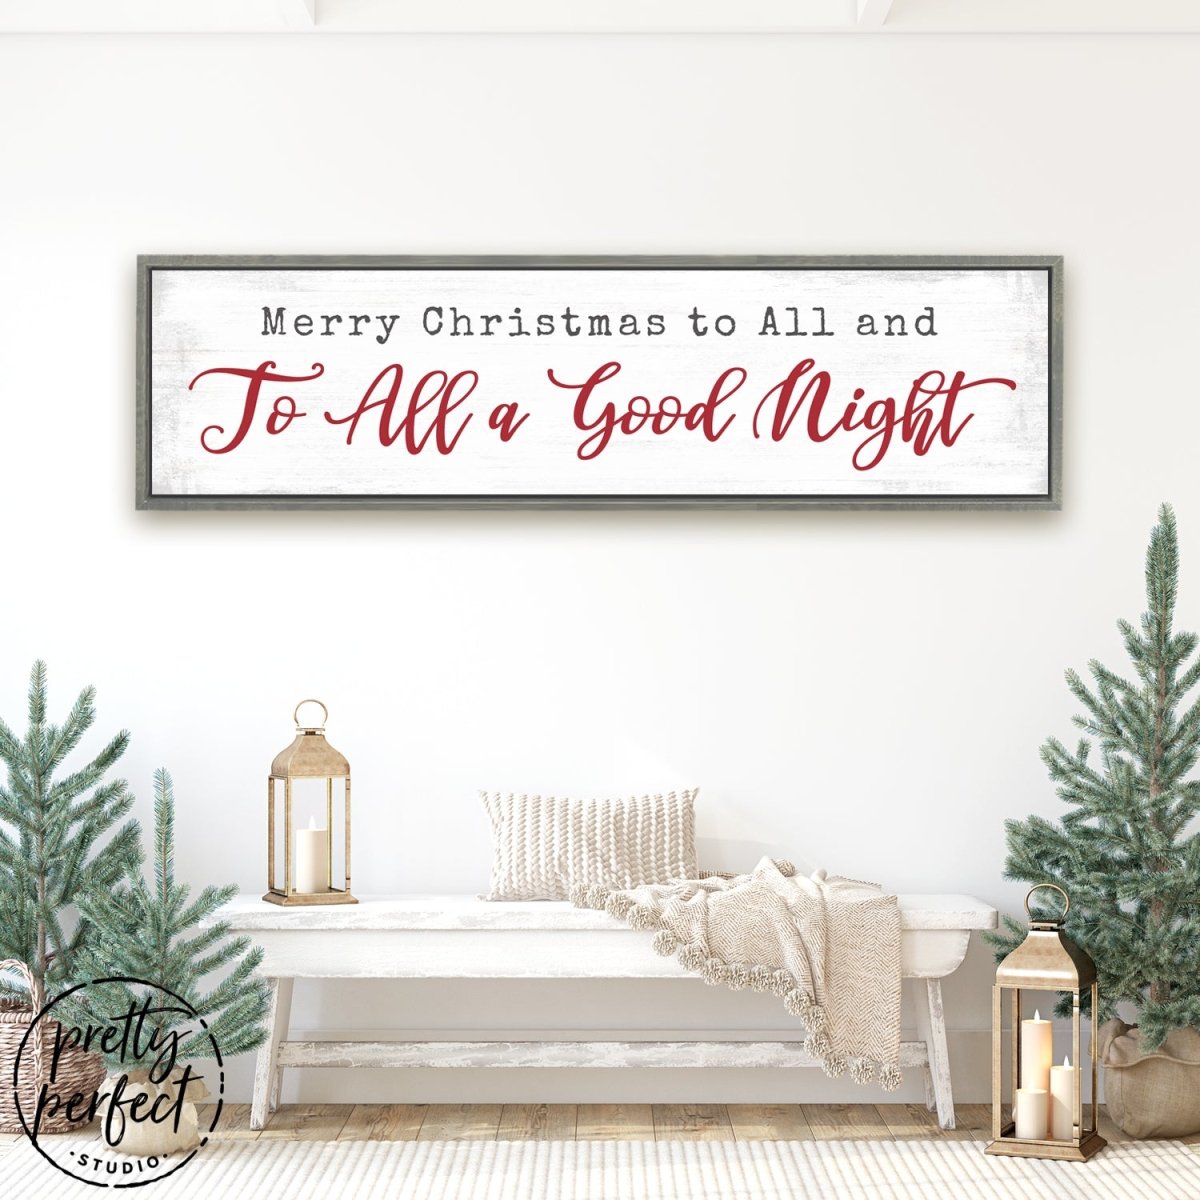 Merry Christmas to All And To All A Good Night Wall Art Above Bench - Pretty Perfect Studio